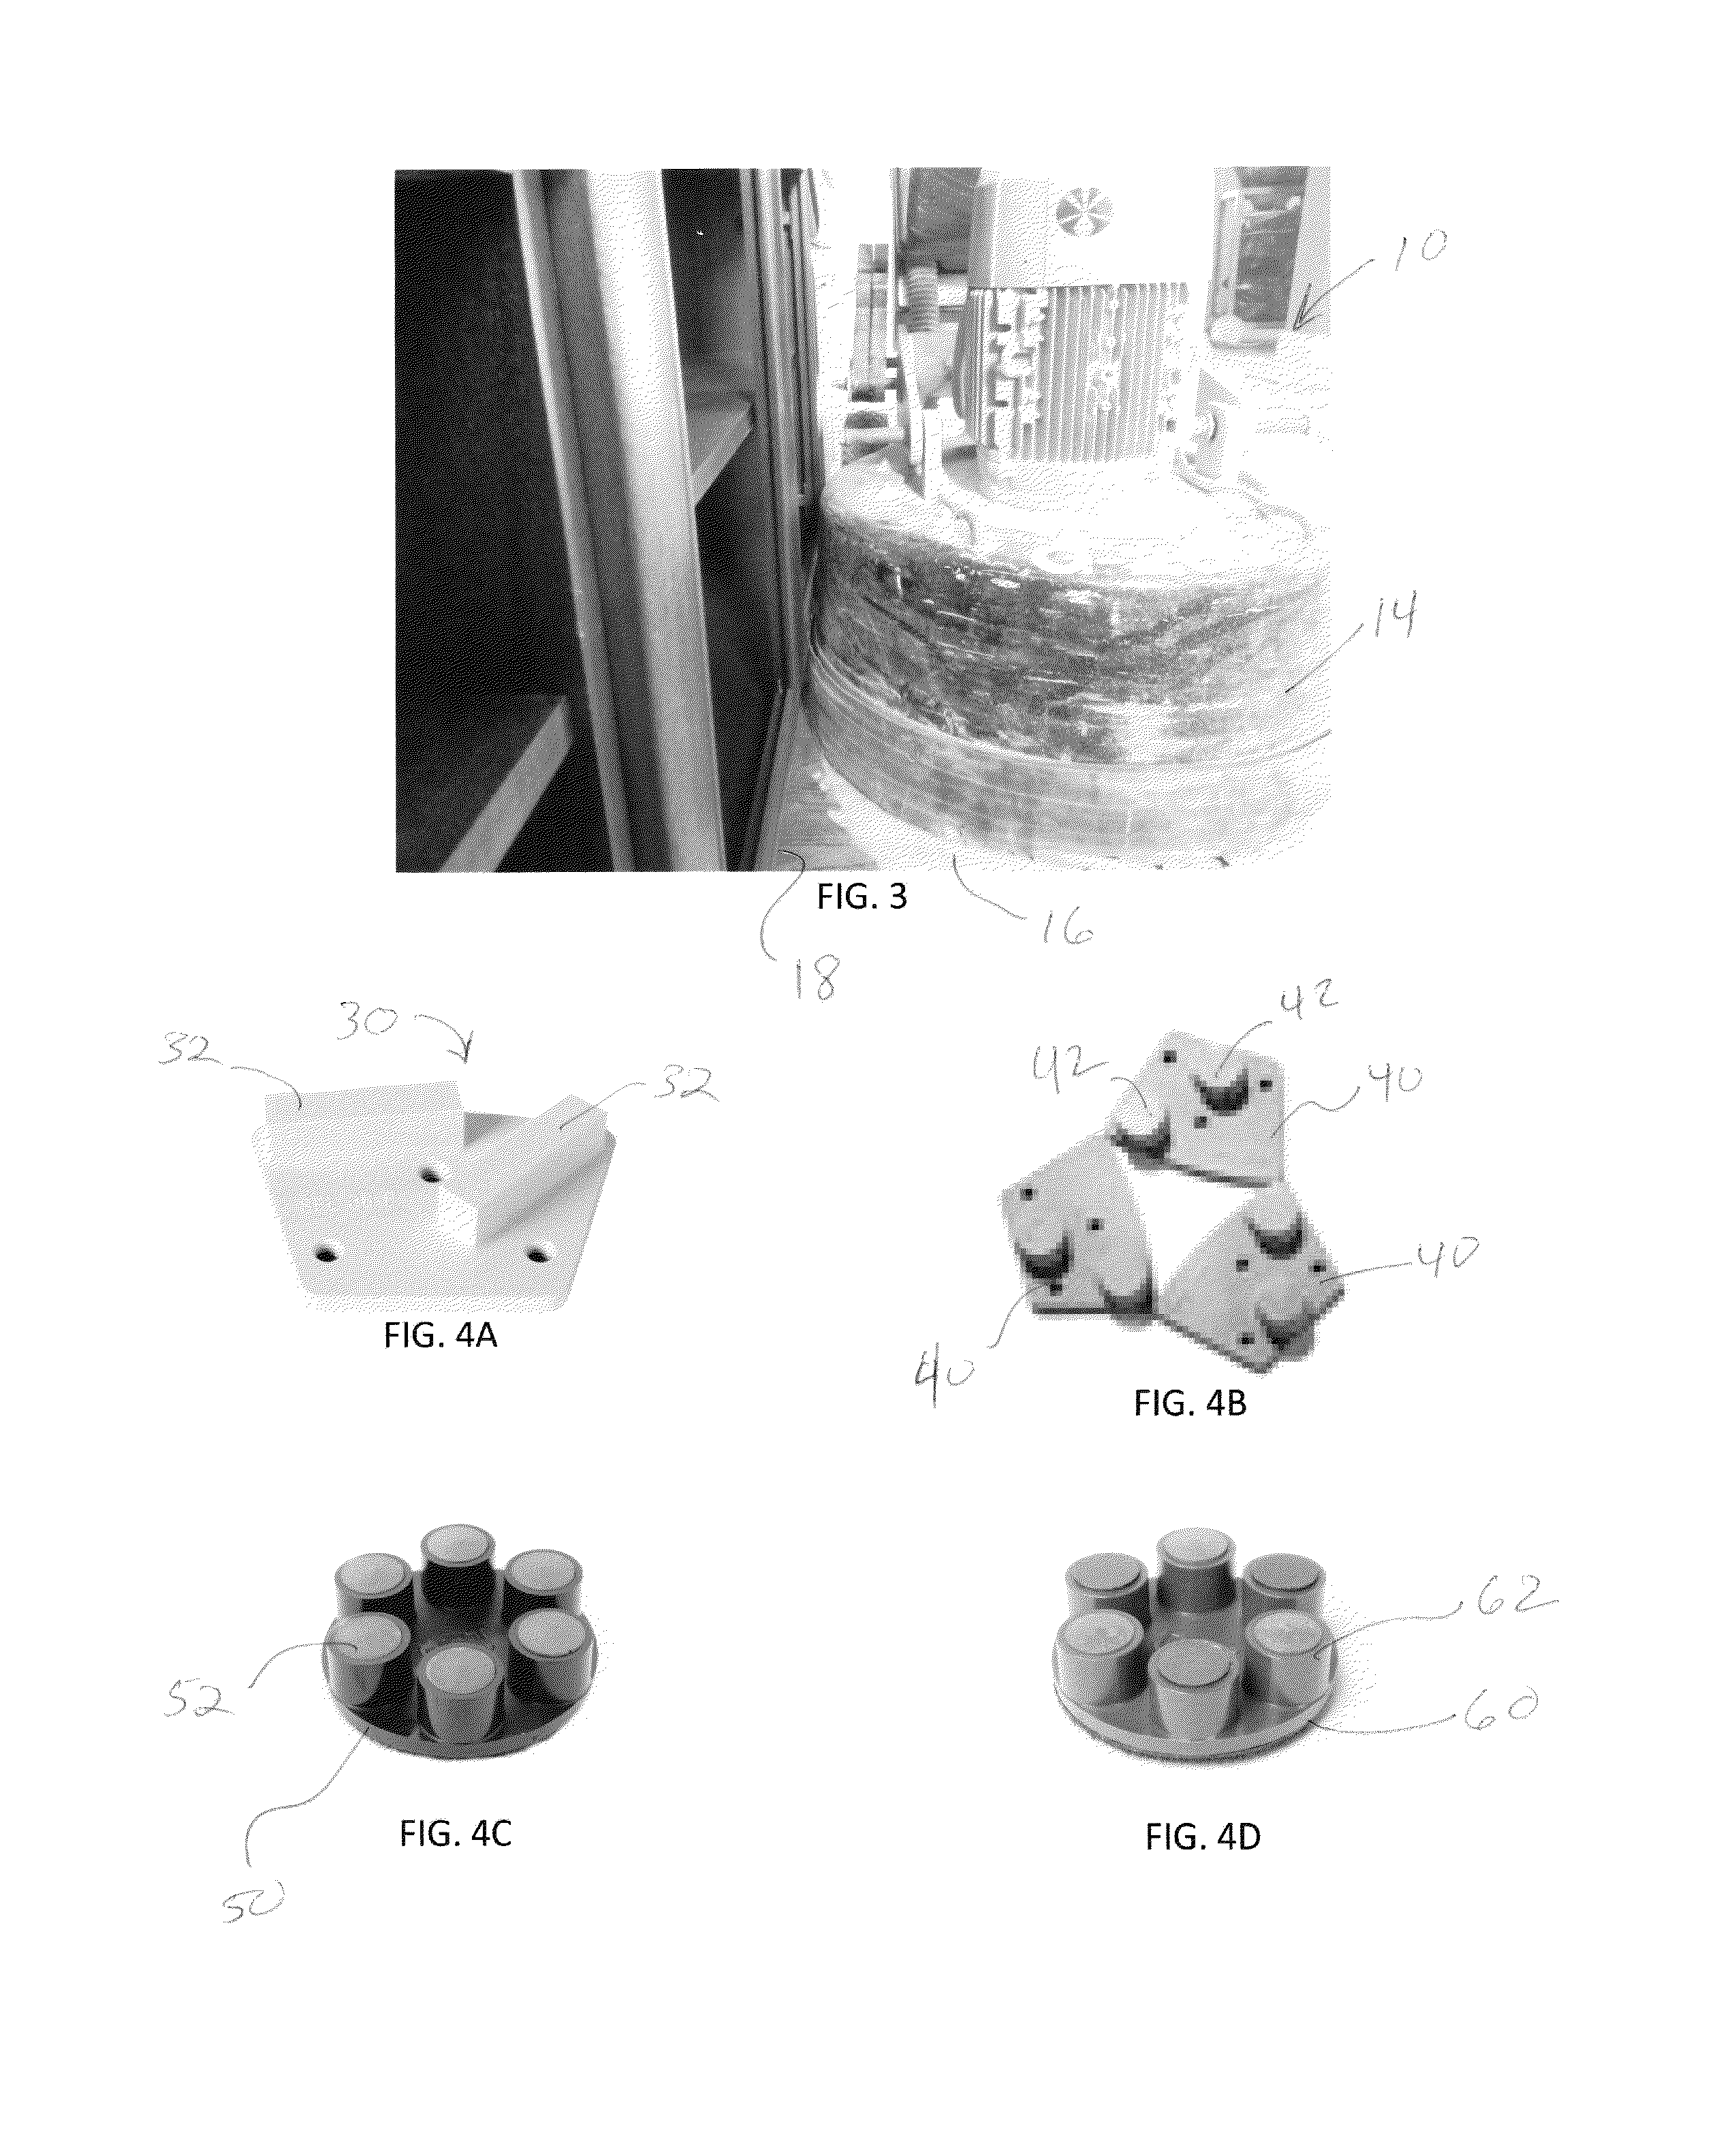 Systems and Methods for Stripping and/or Finishing Wood Surfaces